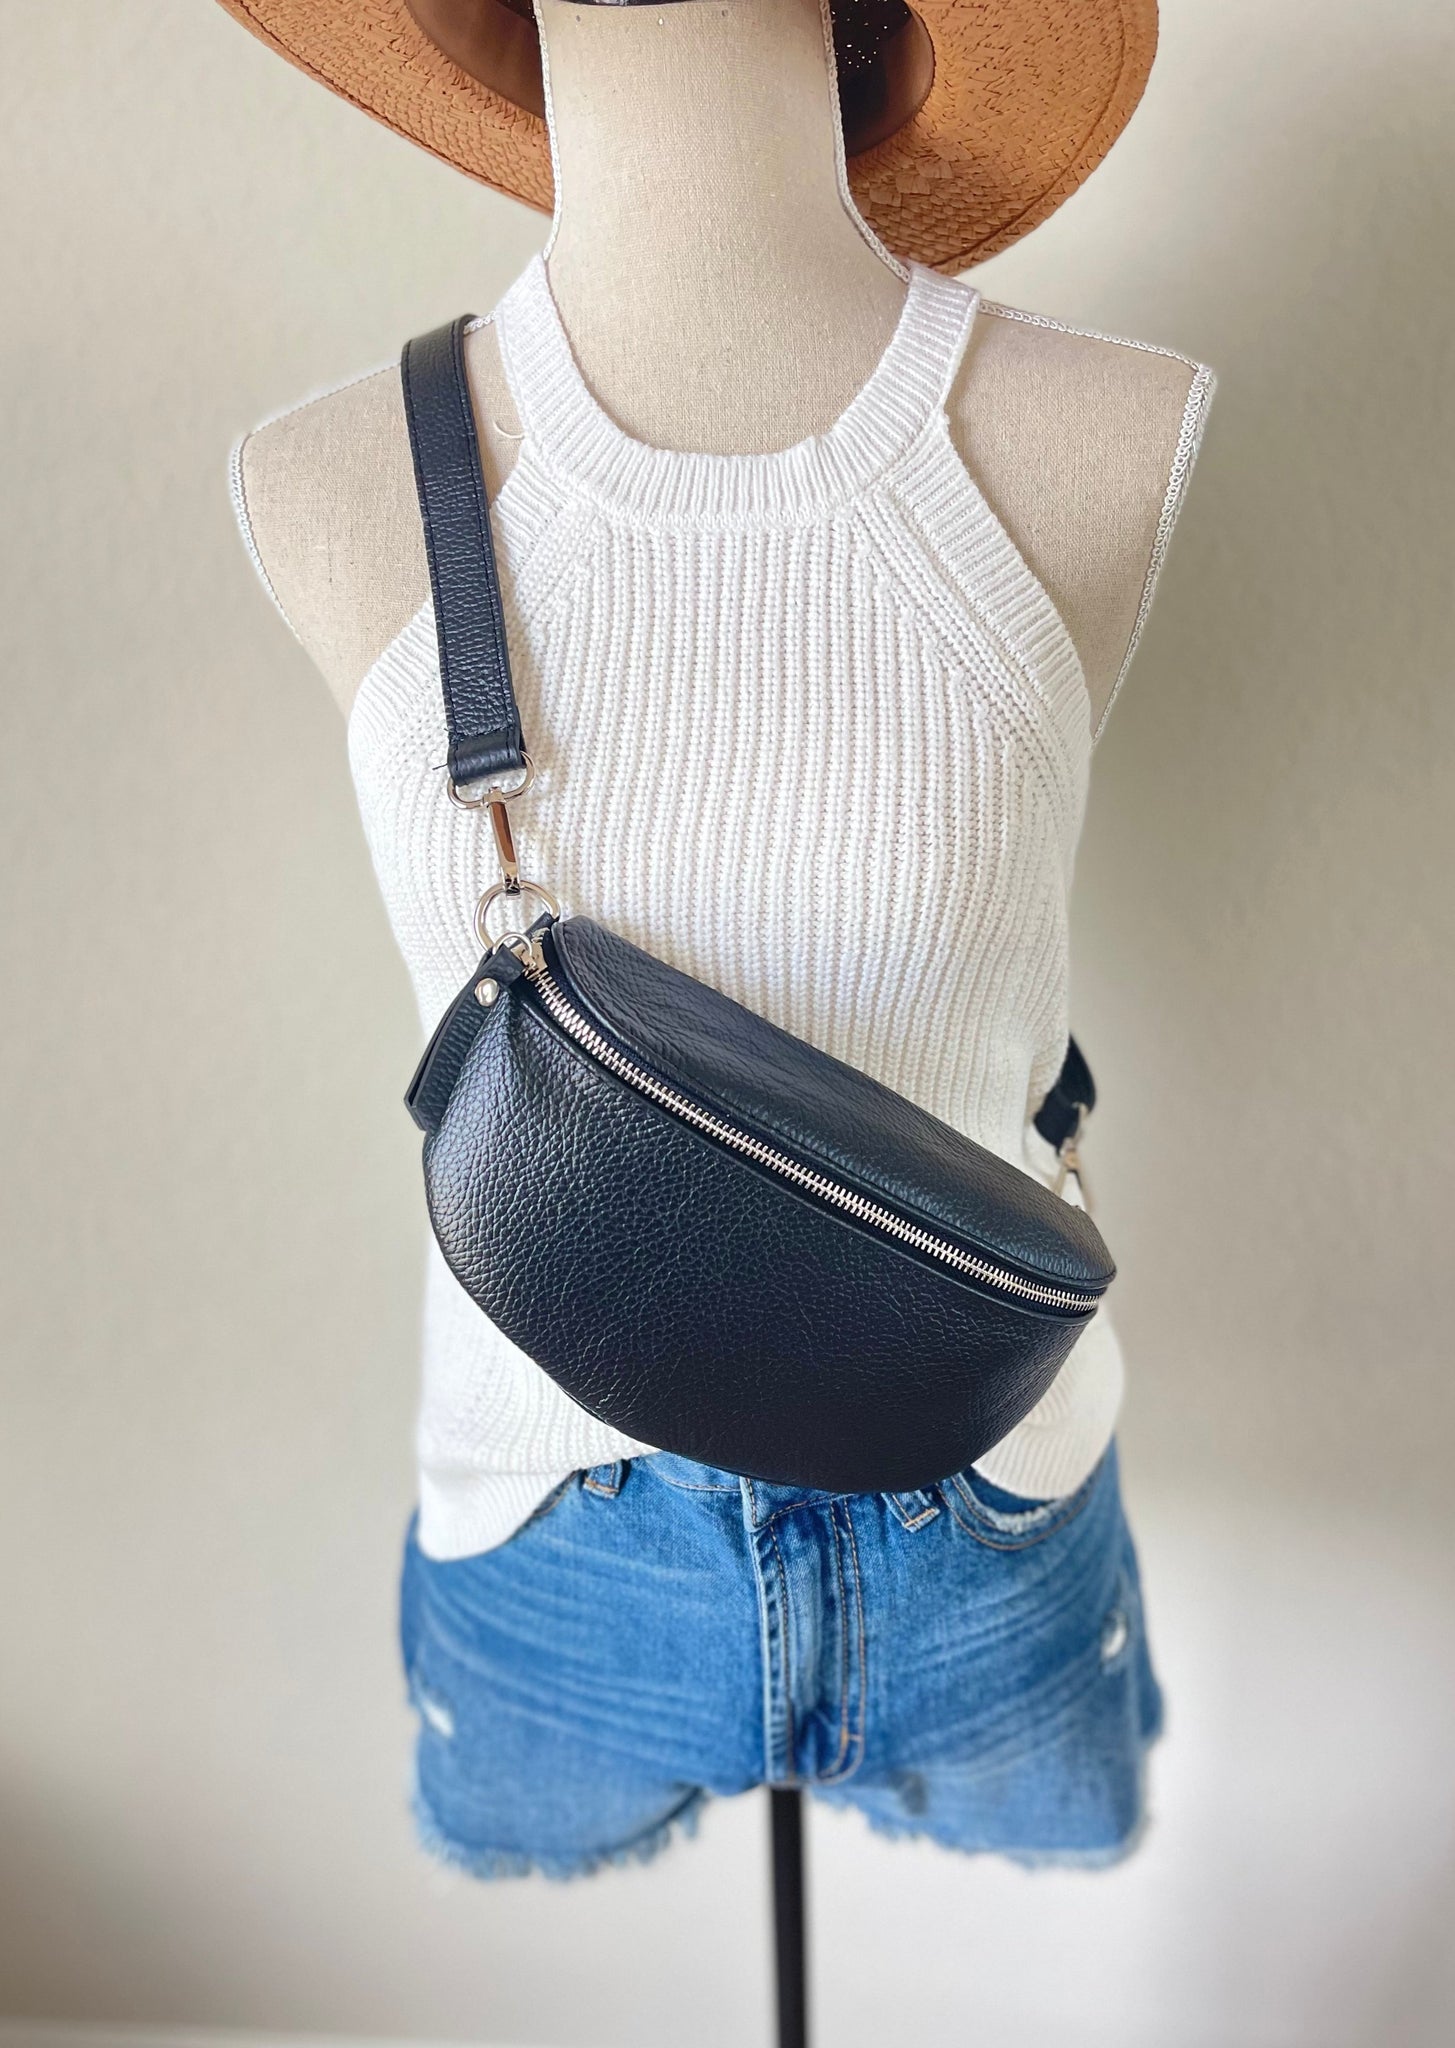 Travel Companion Leather Cross-body Sling Bag in Black